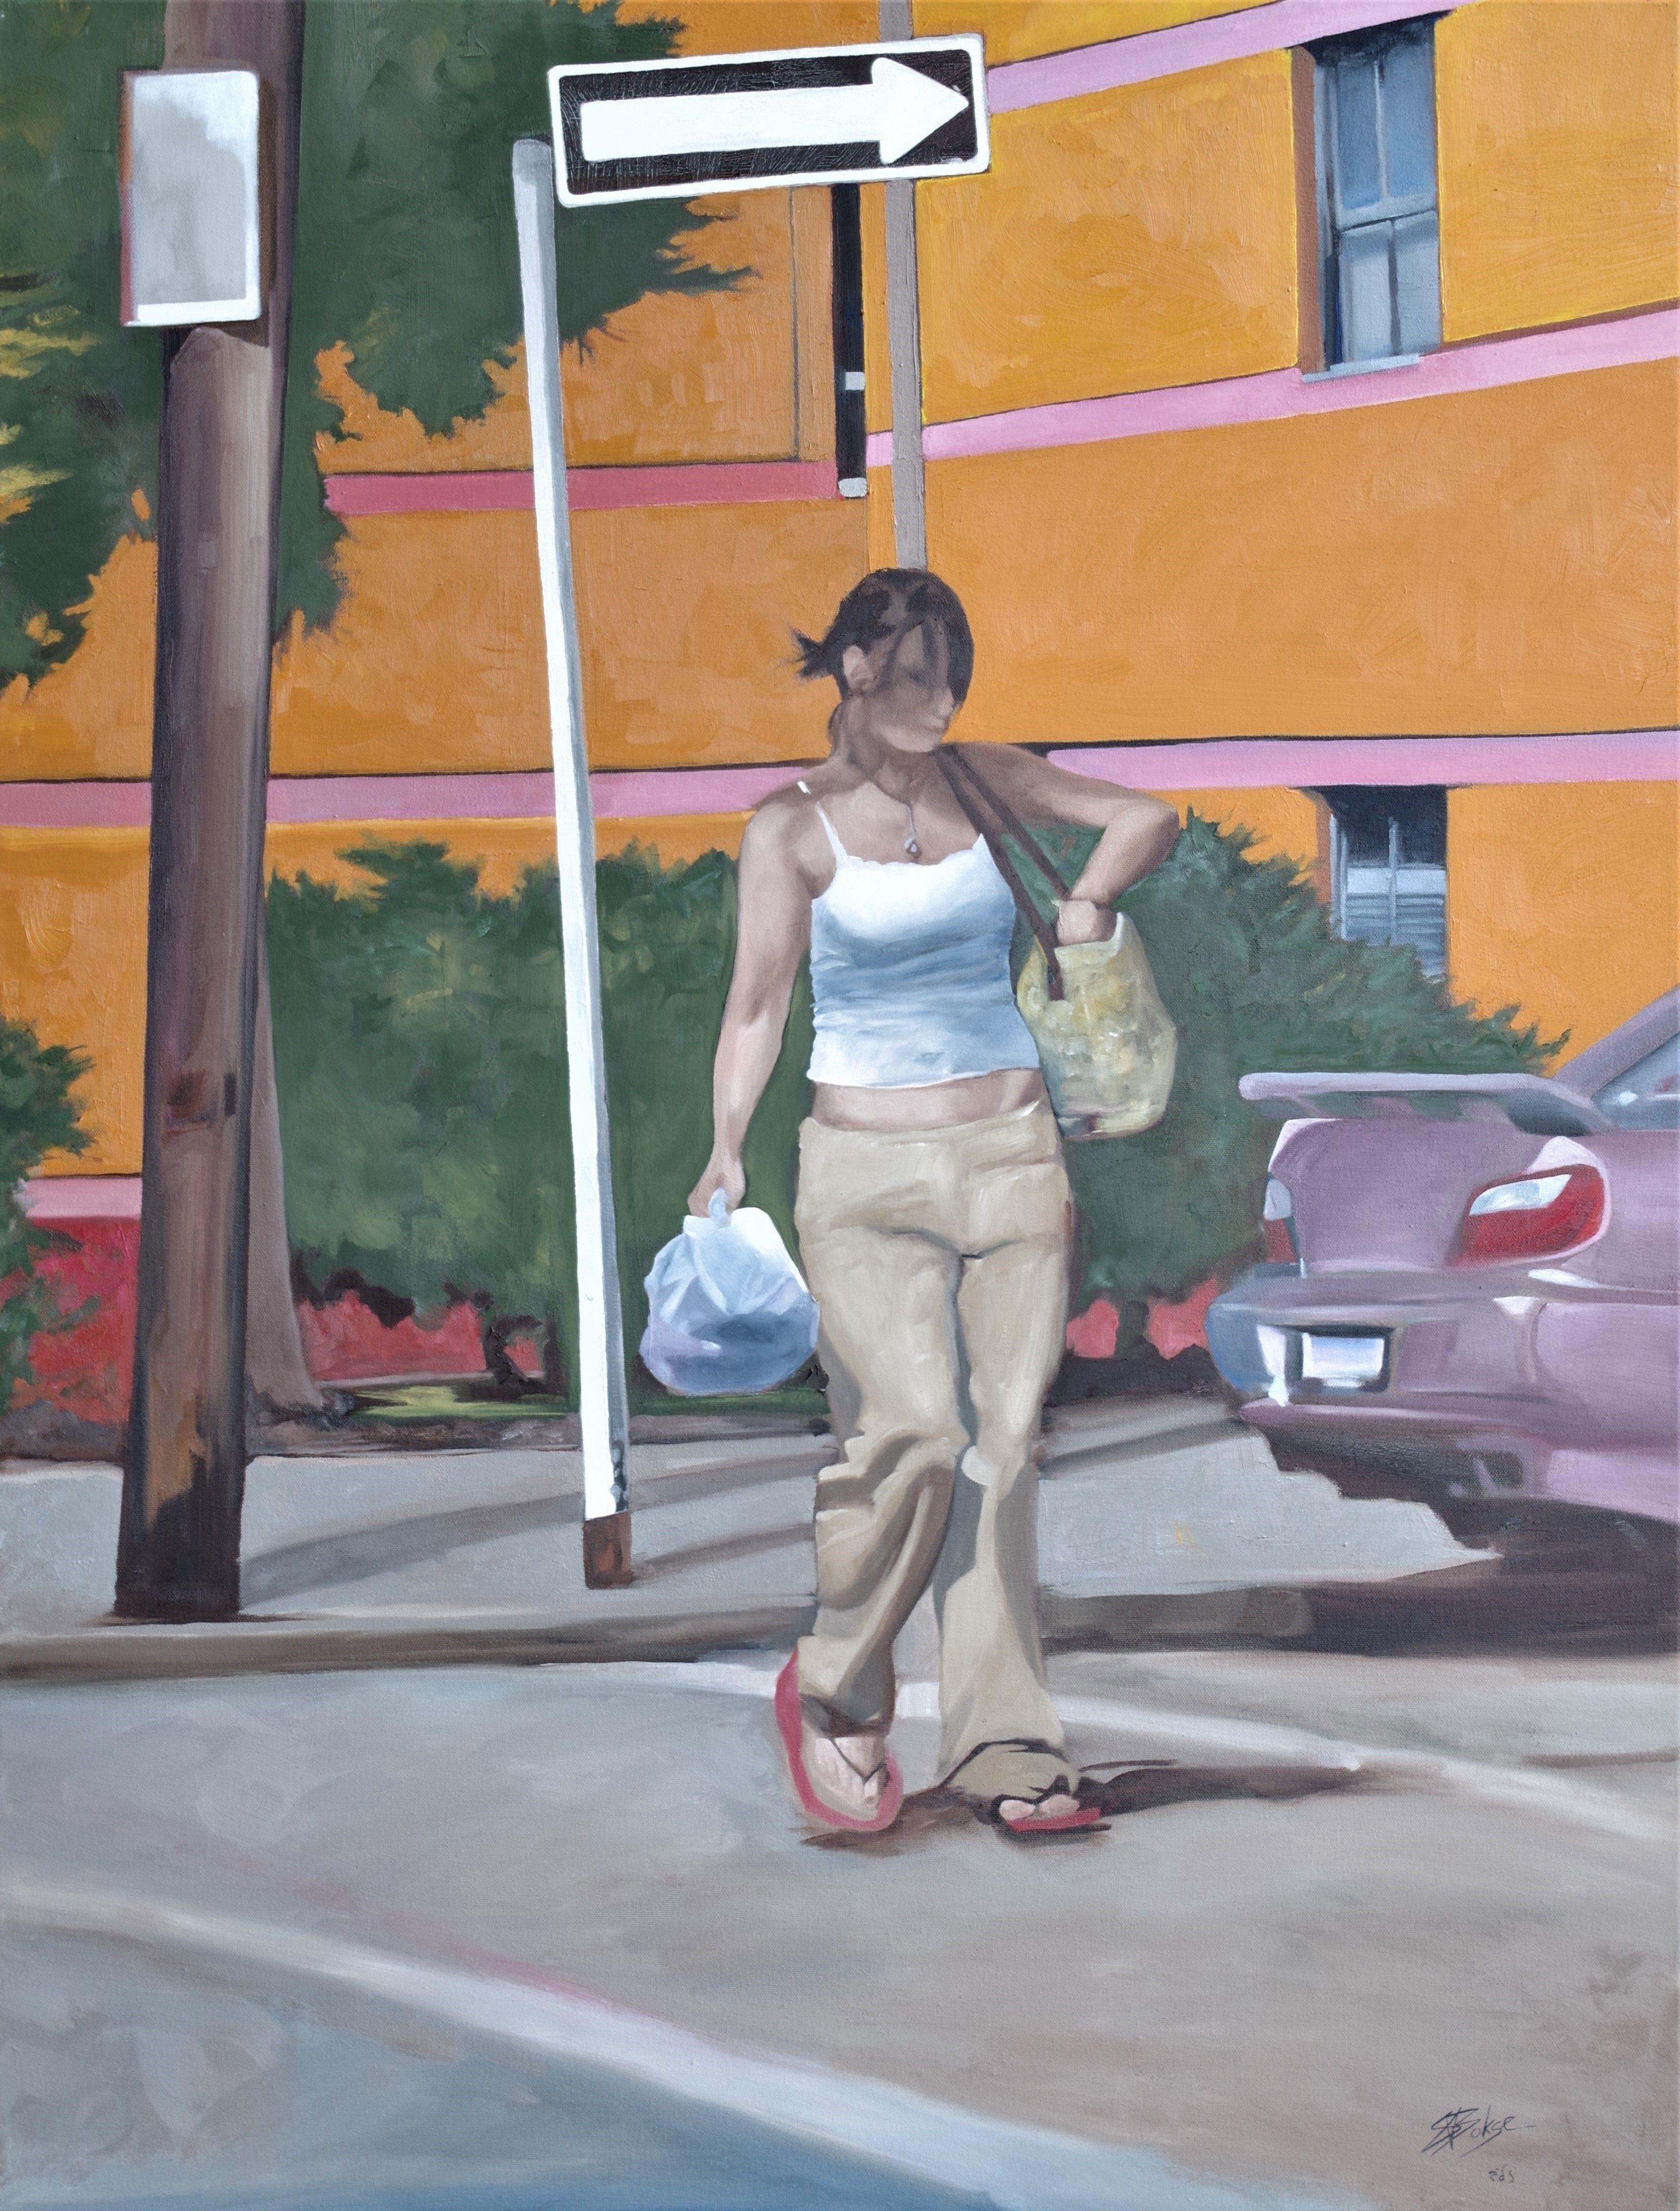 Based on a drive-by photo, a young woman crosses a street in the Oakland neighborhood of Pittsburgh, among the universities, holding one bag while checking the other. :: Painting :: Realism :: This piece comes with an official certificate of